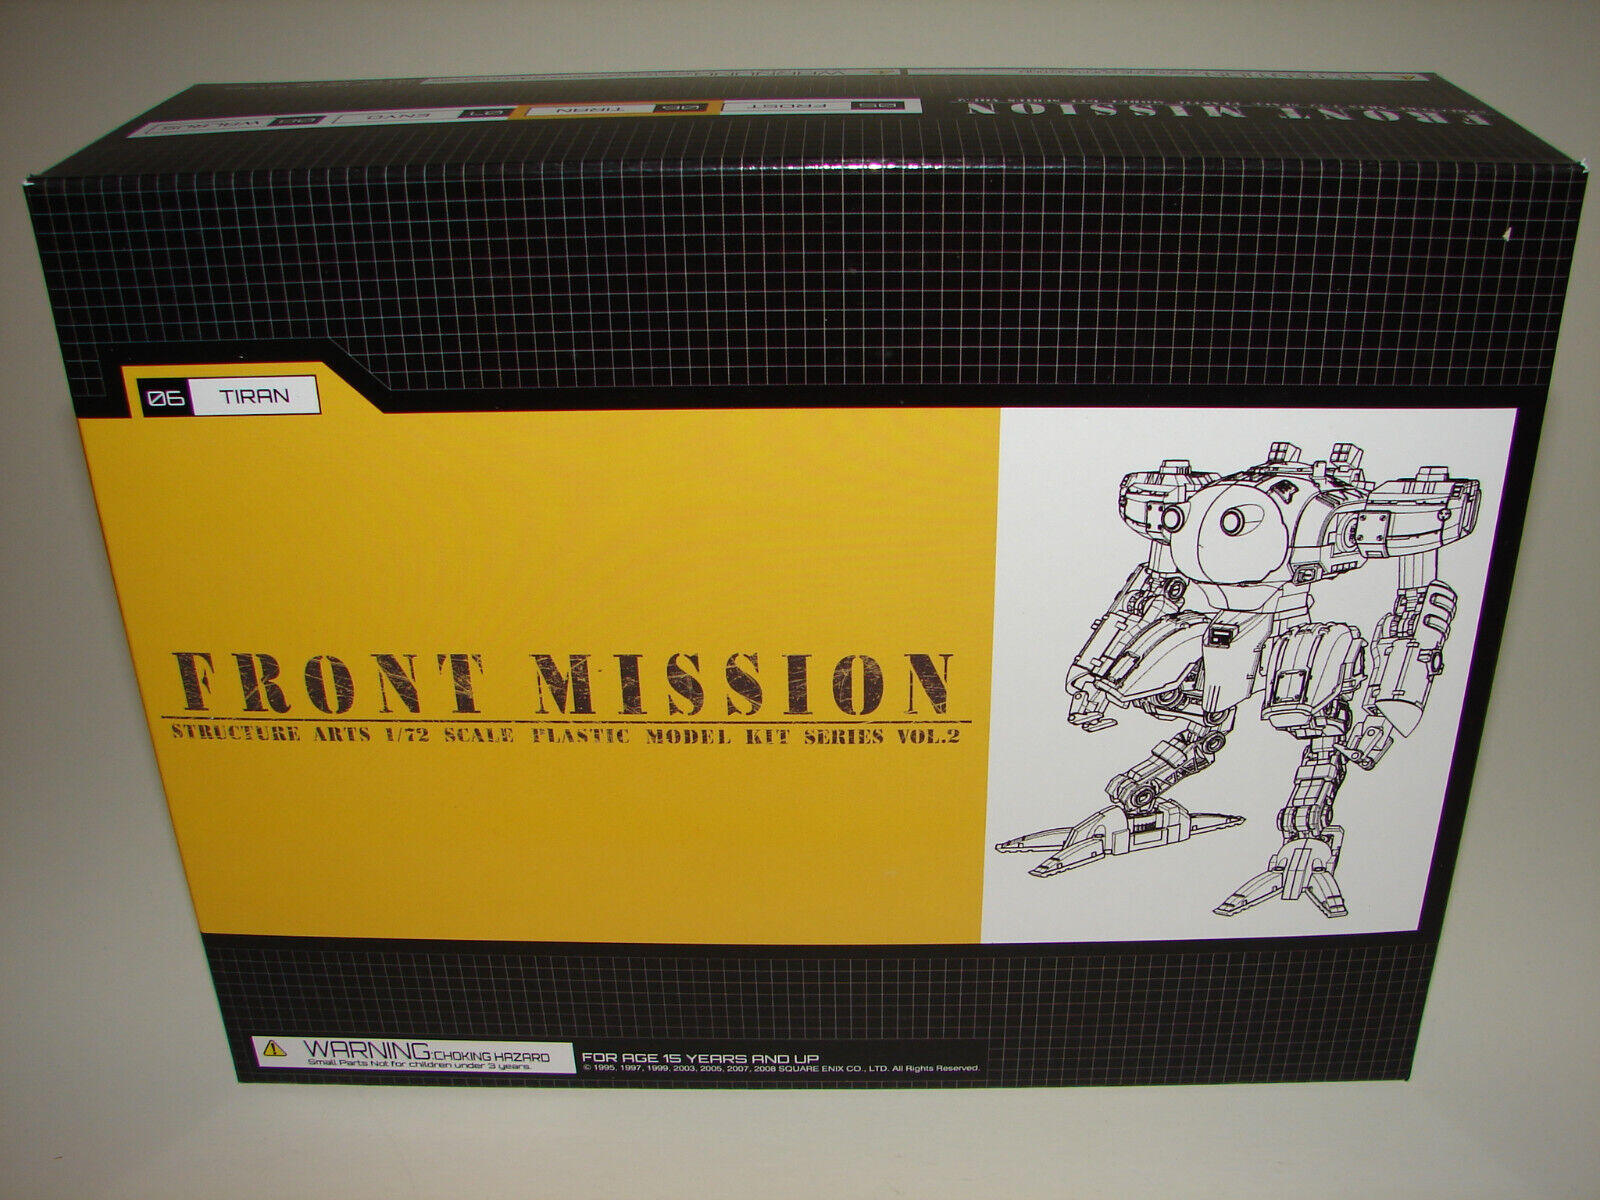 1/72 Tiran from Front Mission Structure Arts Plastic Model Kit Vol. 2 Set